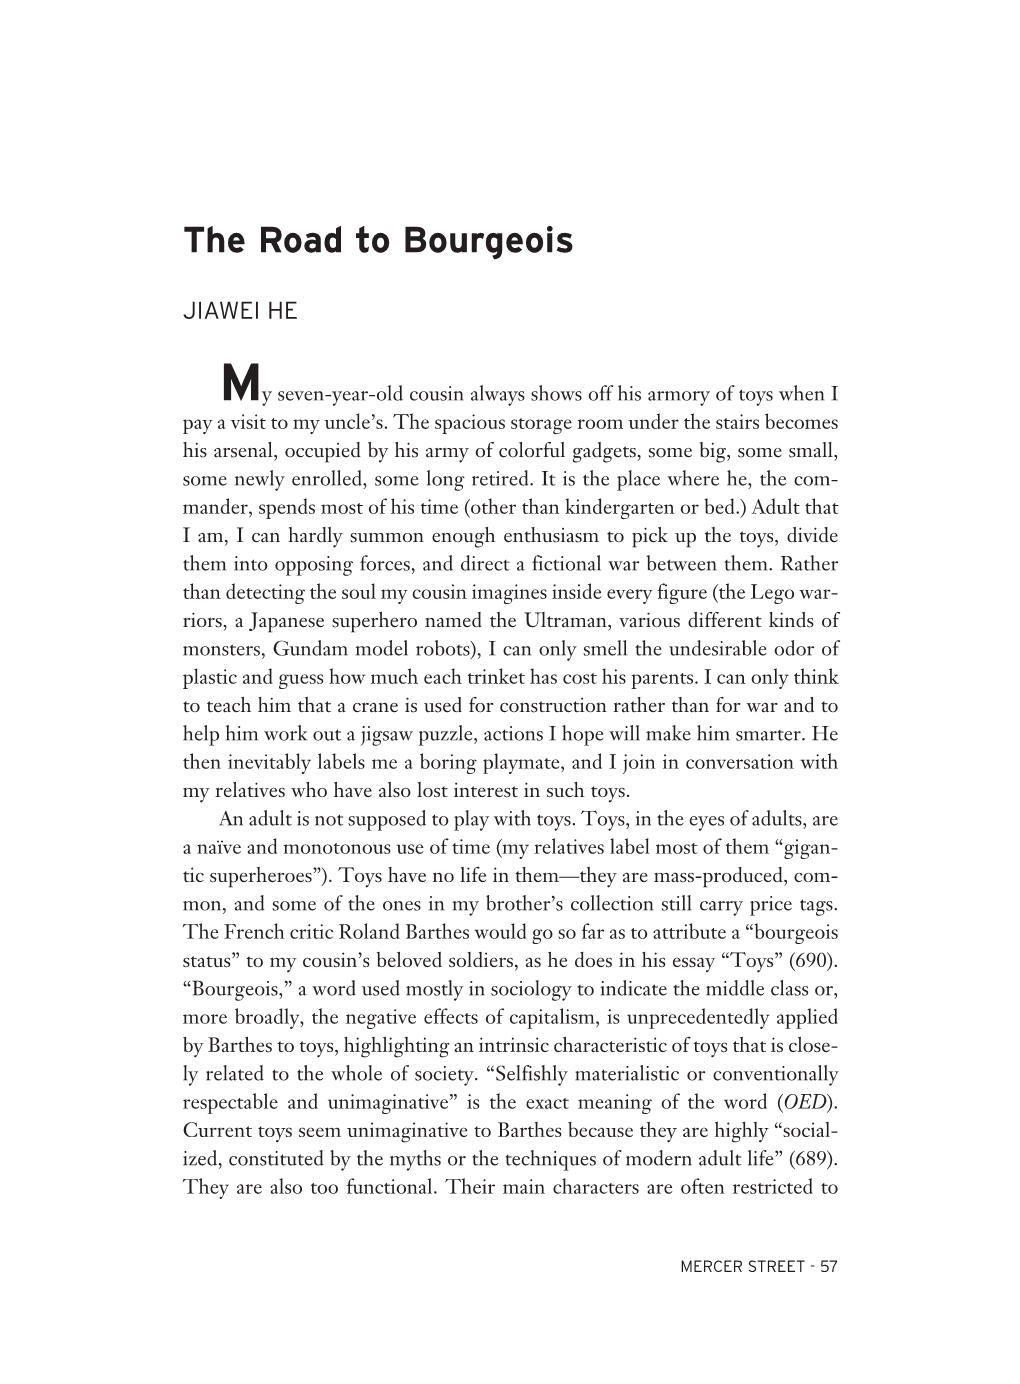 The Road to Bourgeois